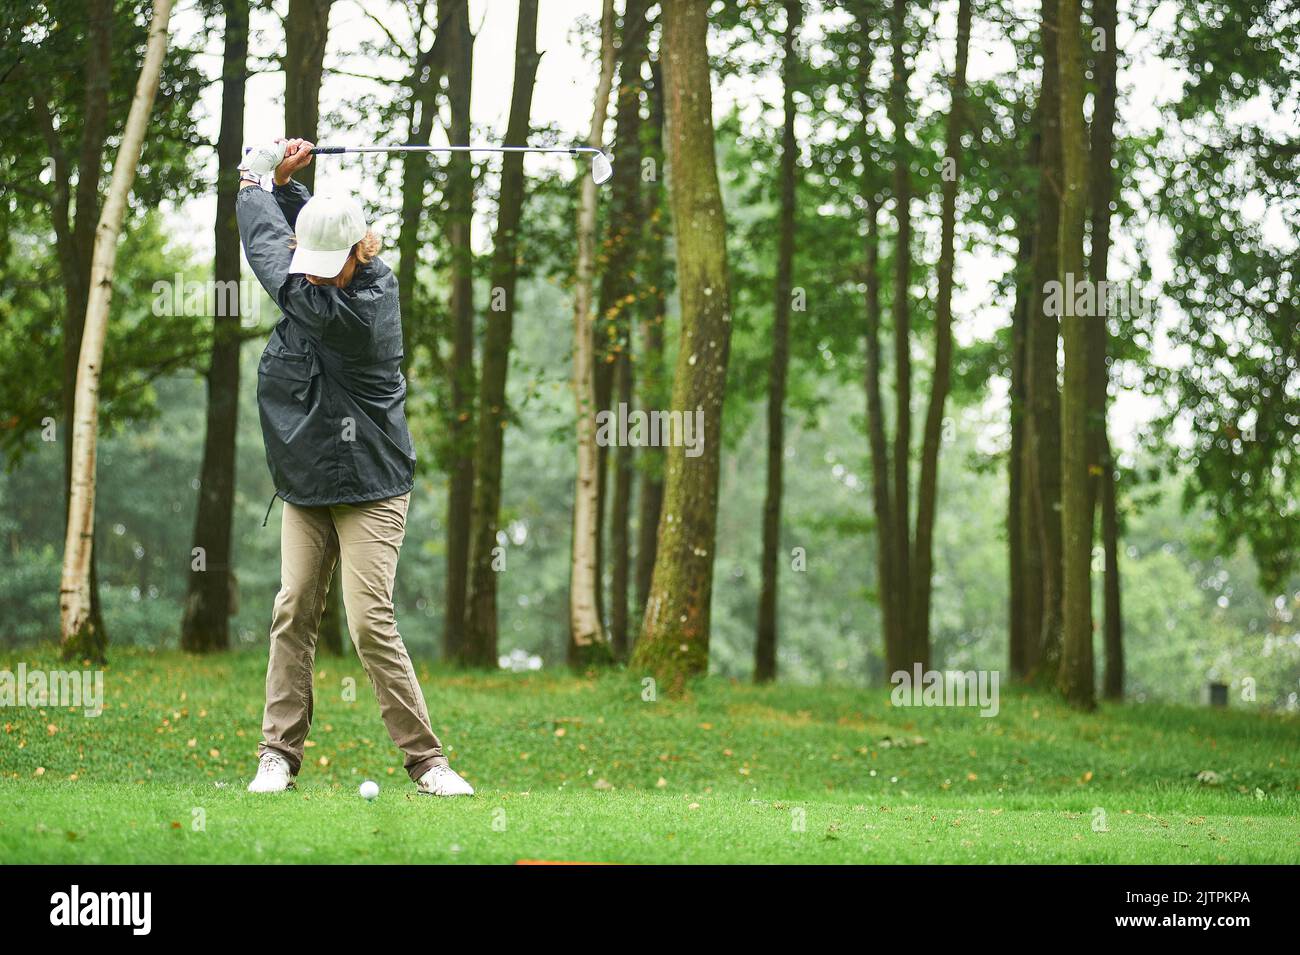 woman with cap playing golf under rain Stock Photo